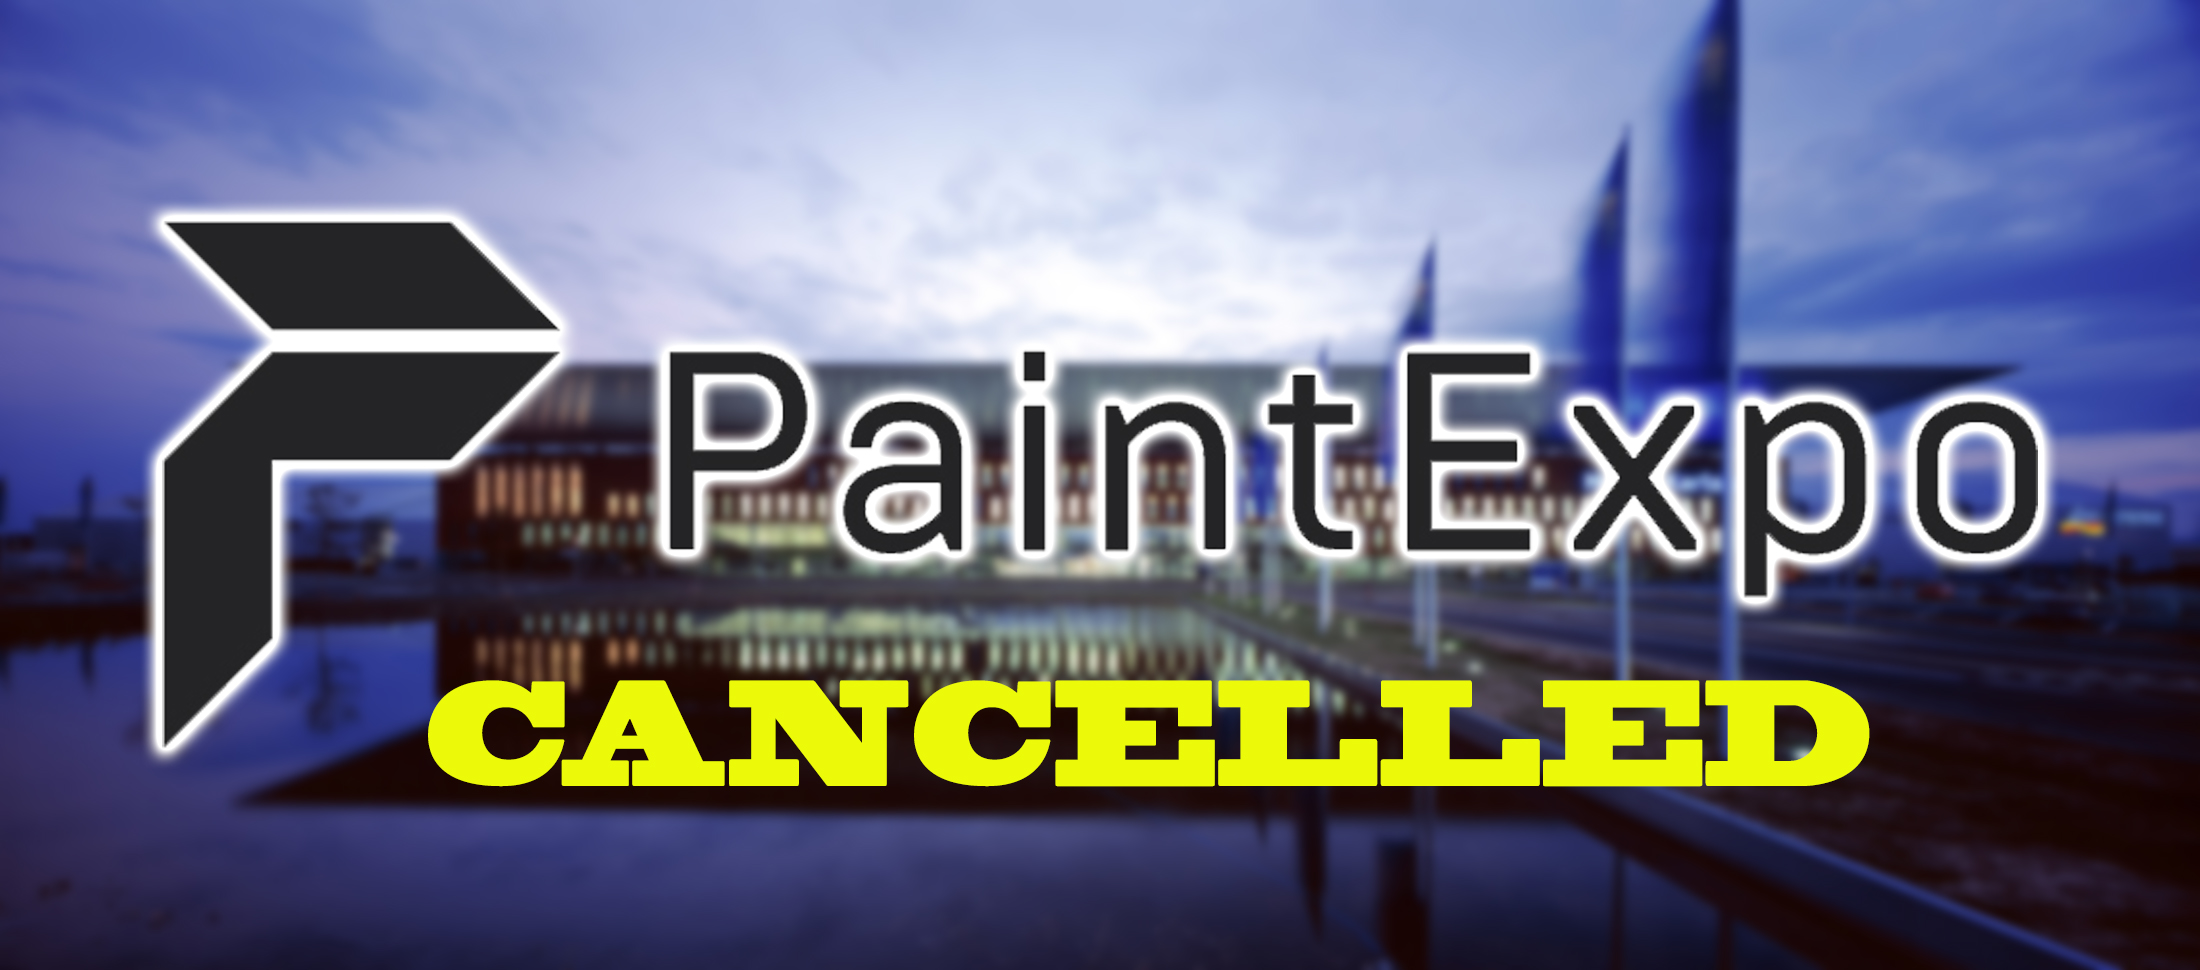 PaintExpo 2020 Cancelled By Organisers